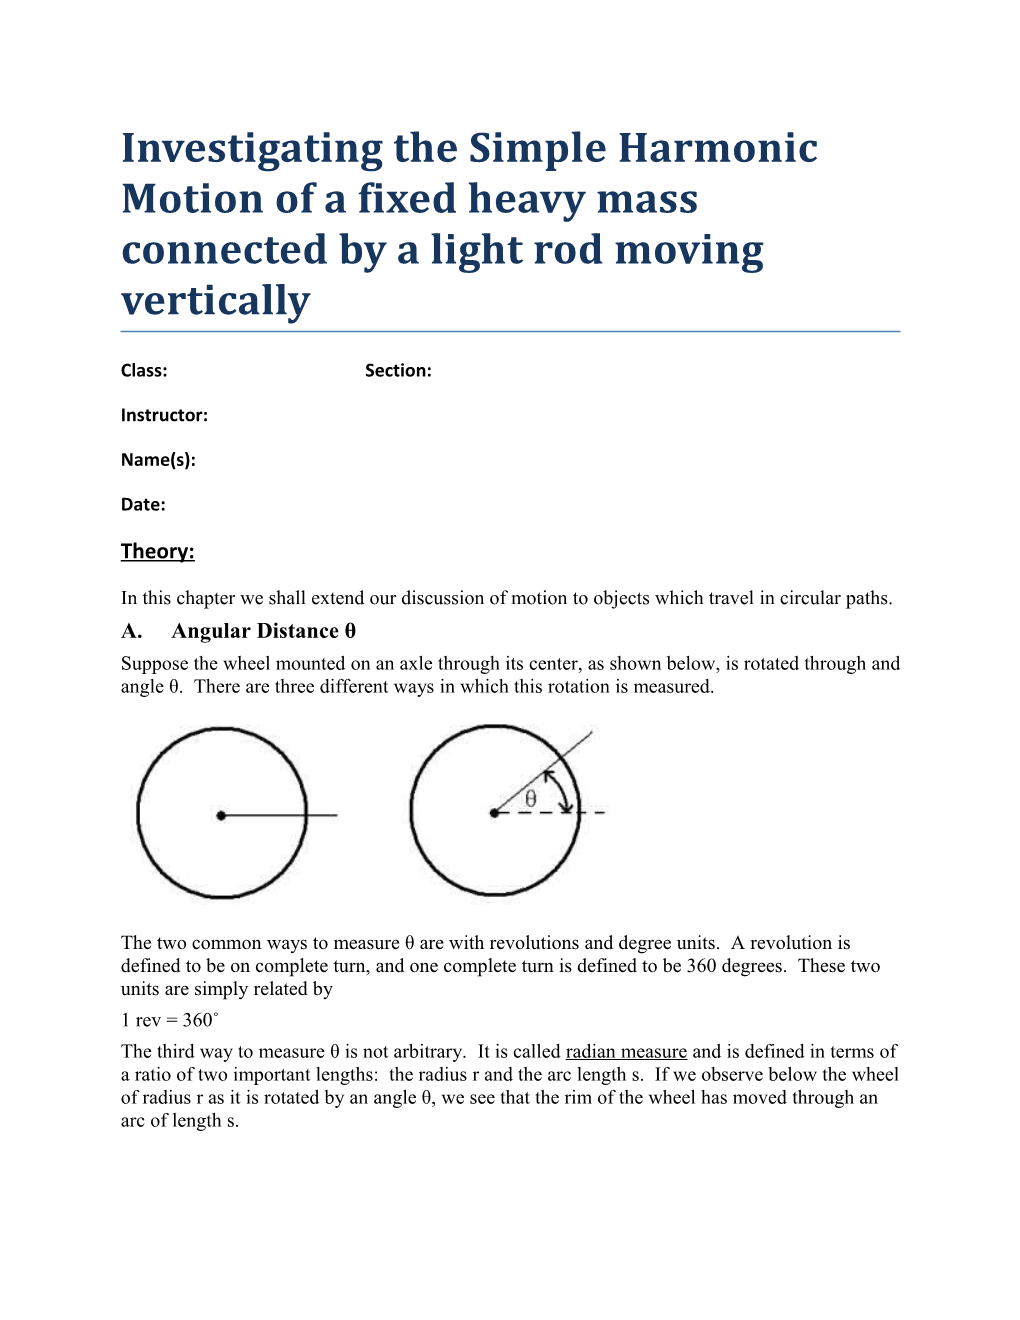 Investigating the Simple Harmonic Motion of a Fixed Heavy Mass Connected by a Light Rod